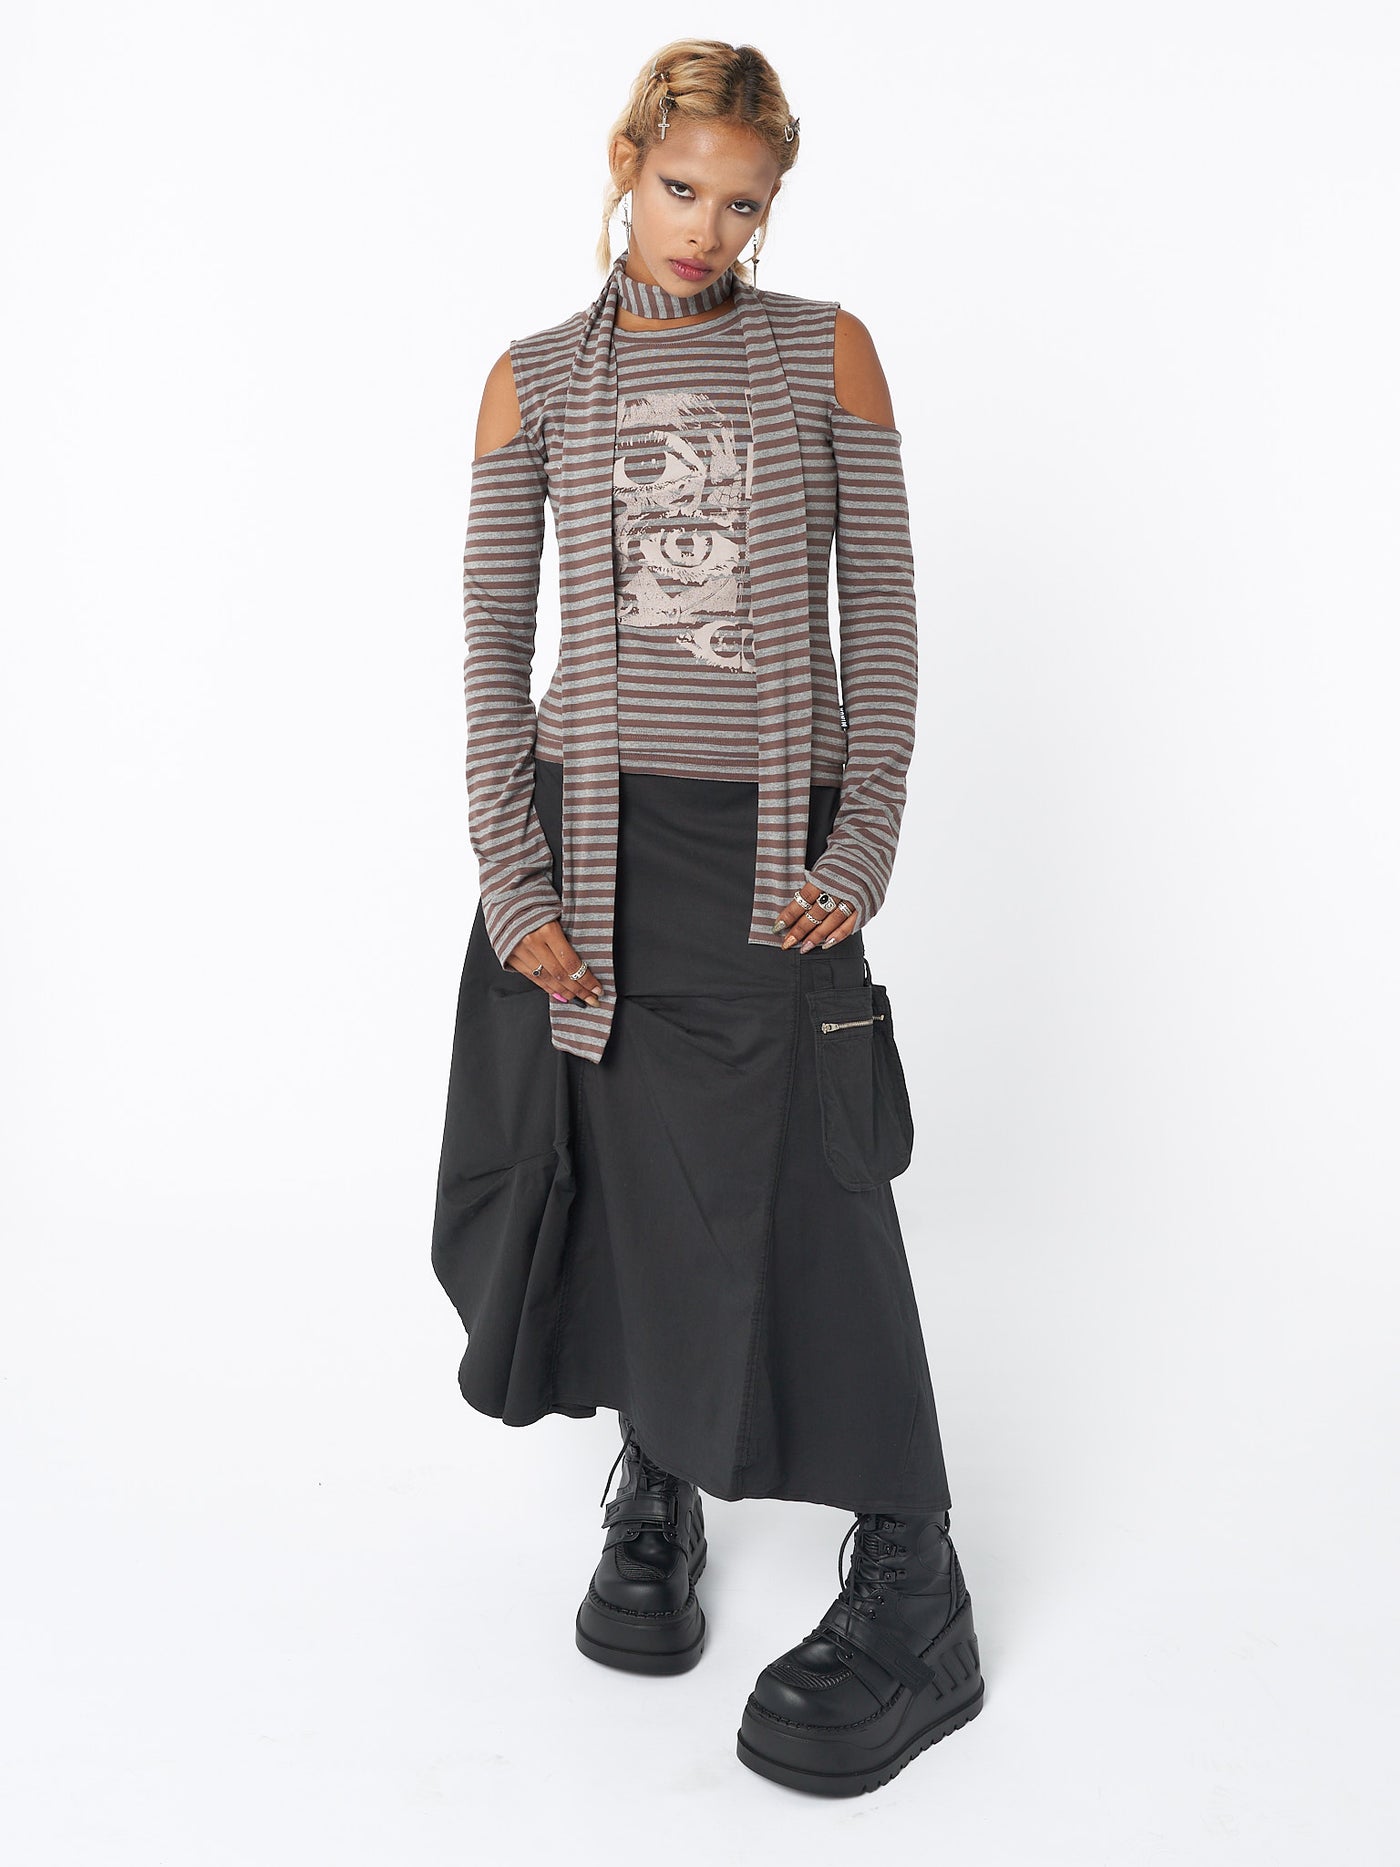 Maxi tech cargo skirt in black with asymmetric style, zip details and front hanging pocket